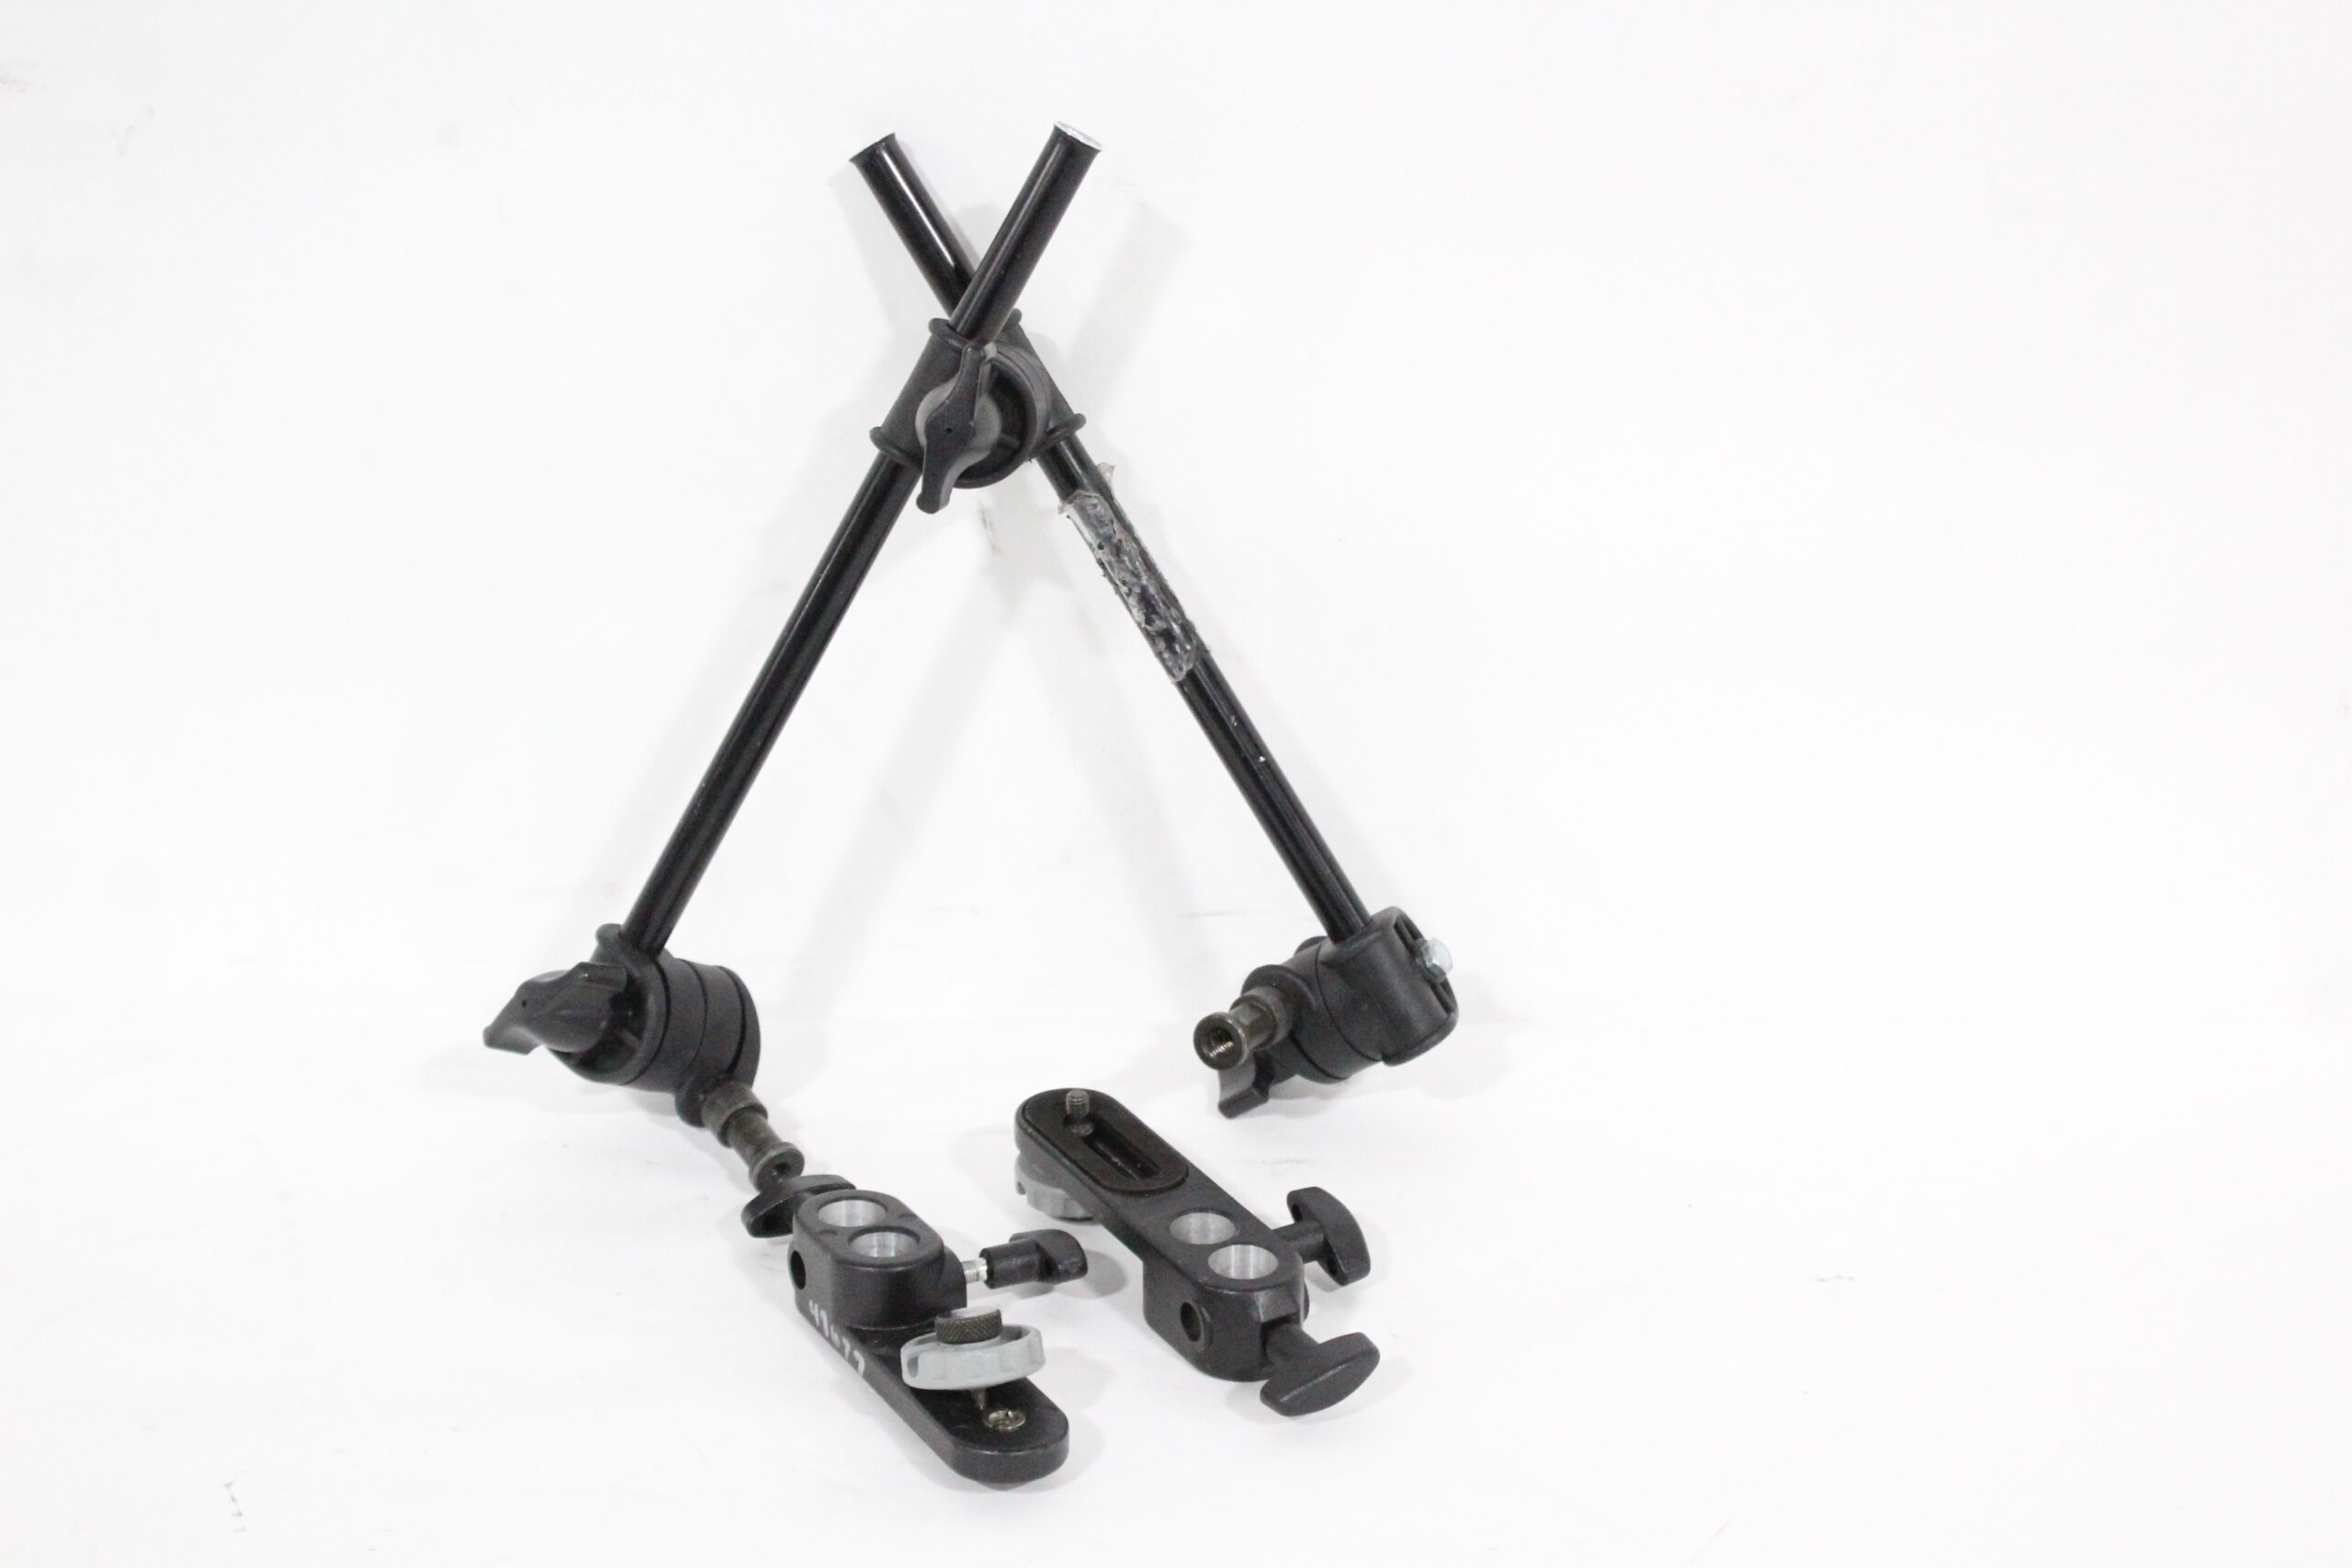 Manfrotto 196b-2 Articulated Arm w/ (2) Mounting Pieces · AVGear